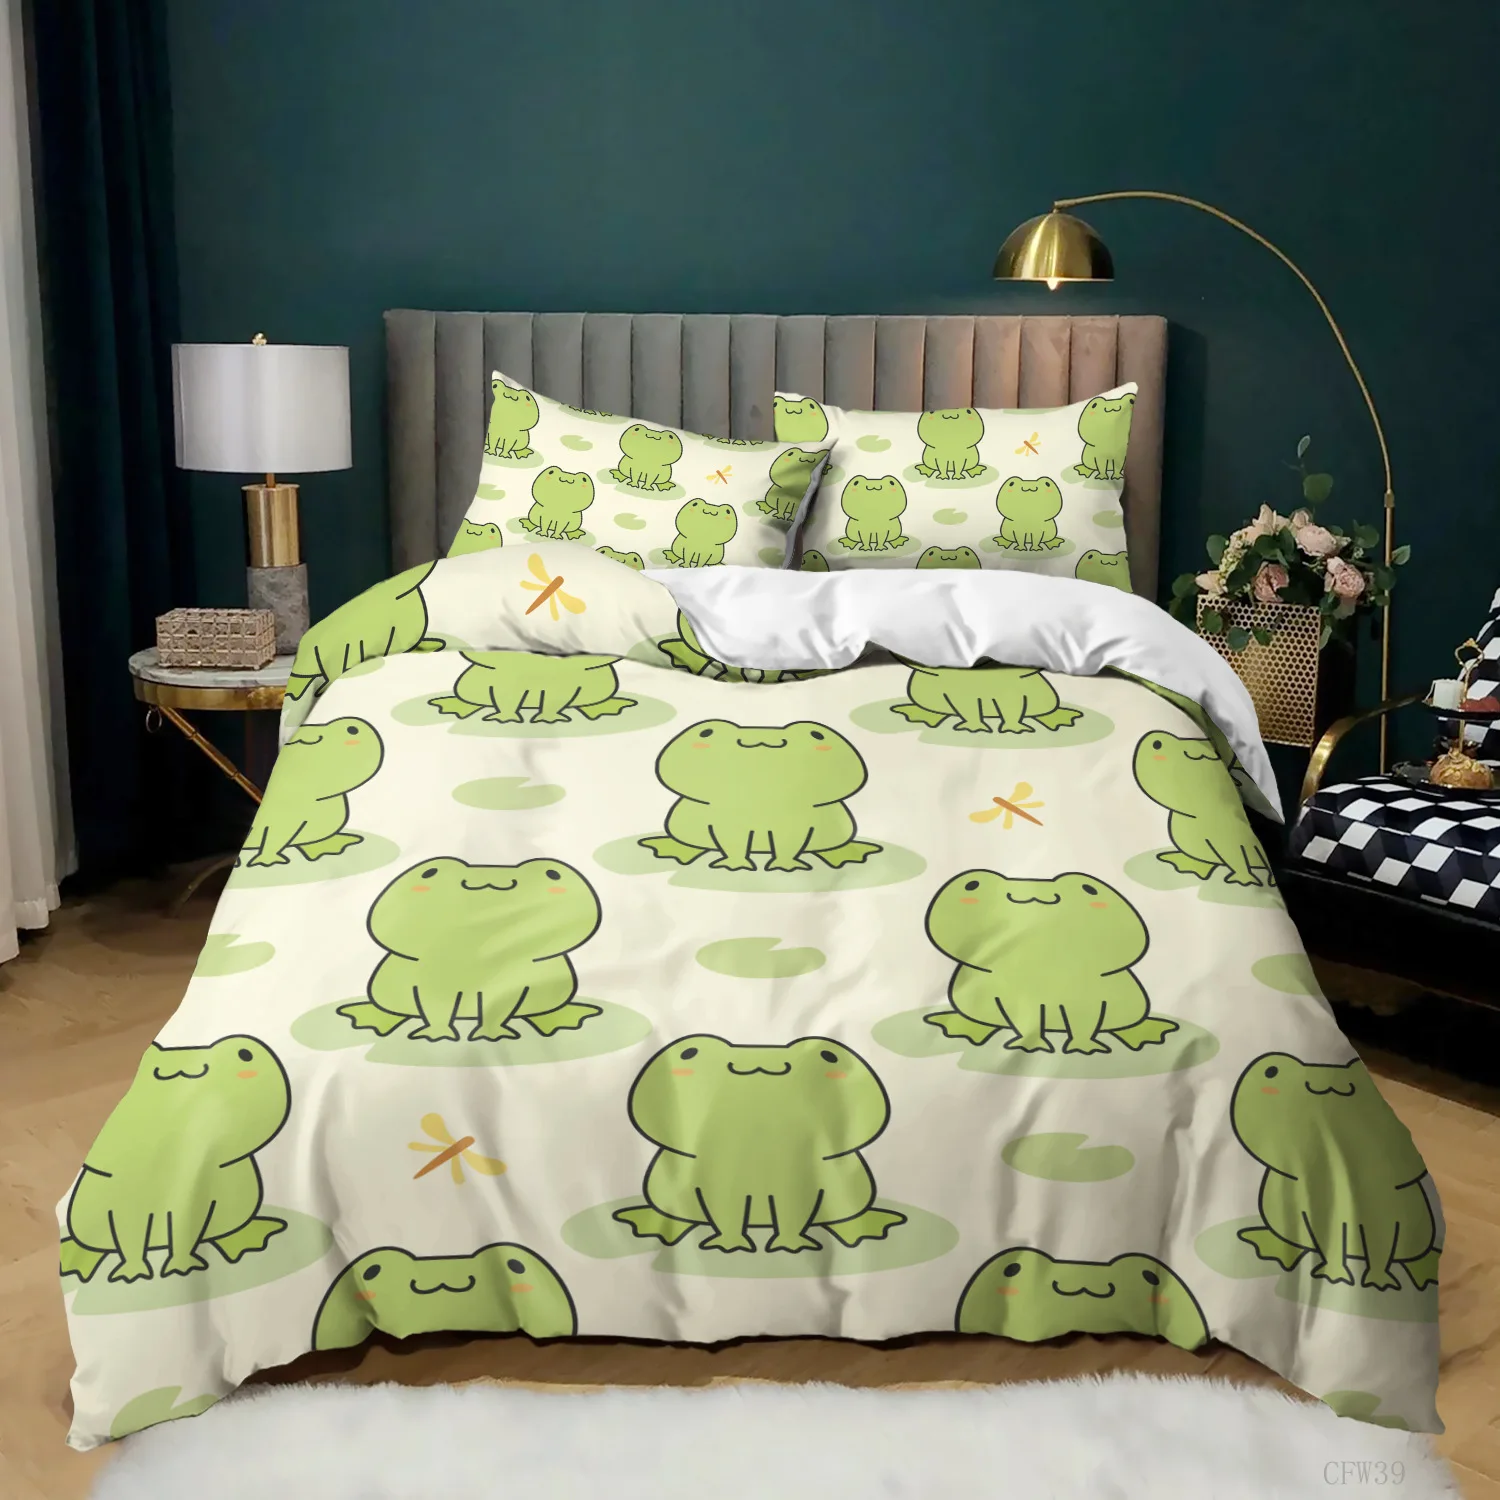 Kids Cartoon Bedding Set Cute Frog Comforter Cover Set Animal Duvet Cover Set for Children Kids Twin Quilt Cover with Pillowcase images - 6